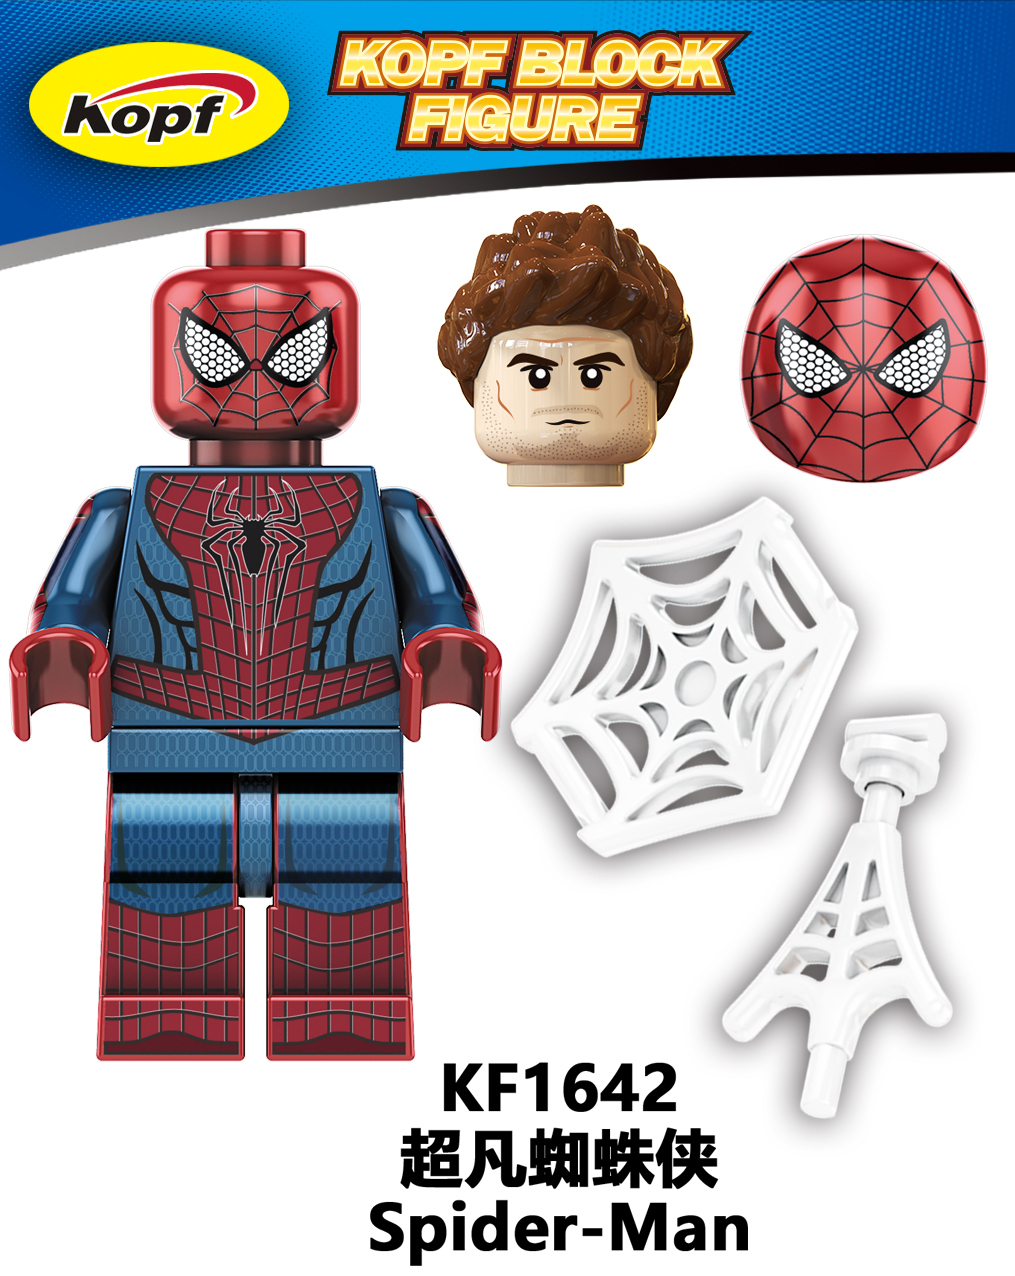 KF1641 KF1642 KF1643 KF1644 KF1645 KF1646 KF1647 KF1648 KF6153 Spiderman Super Heroes Movie Series Characters Bricks Building Blocks Action Figures Educational Toys For Children's Gifts